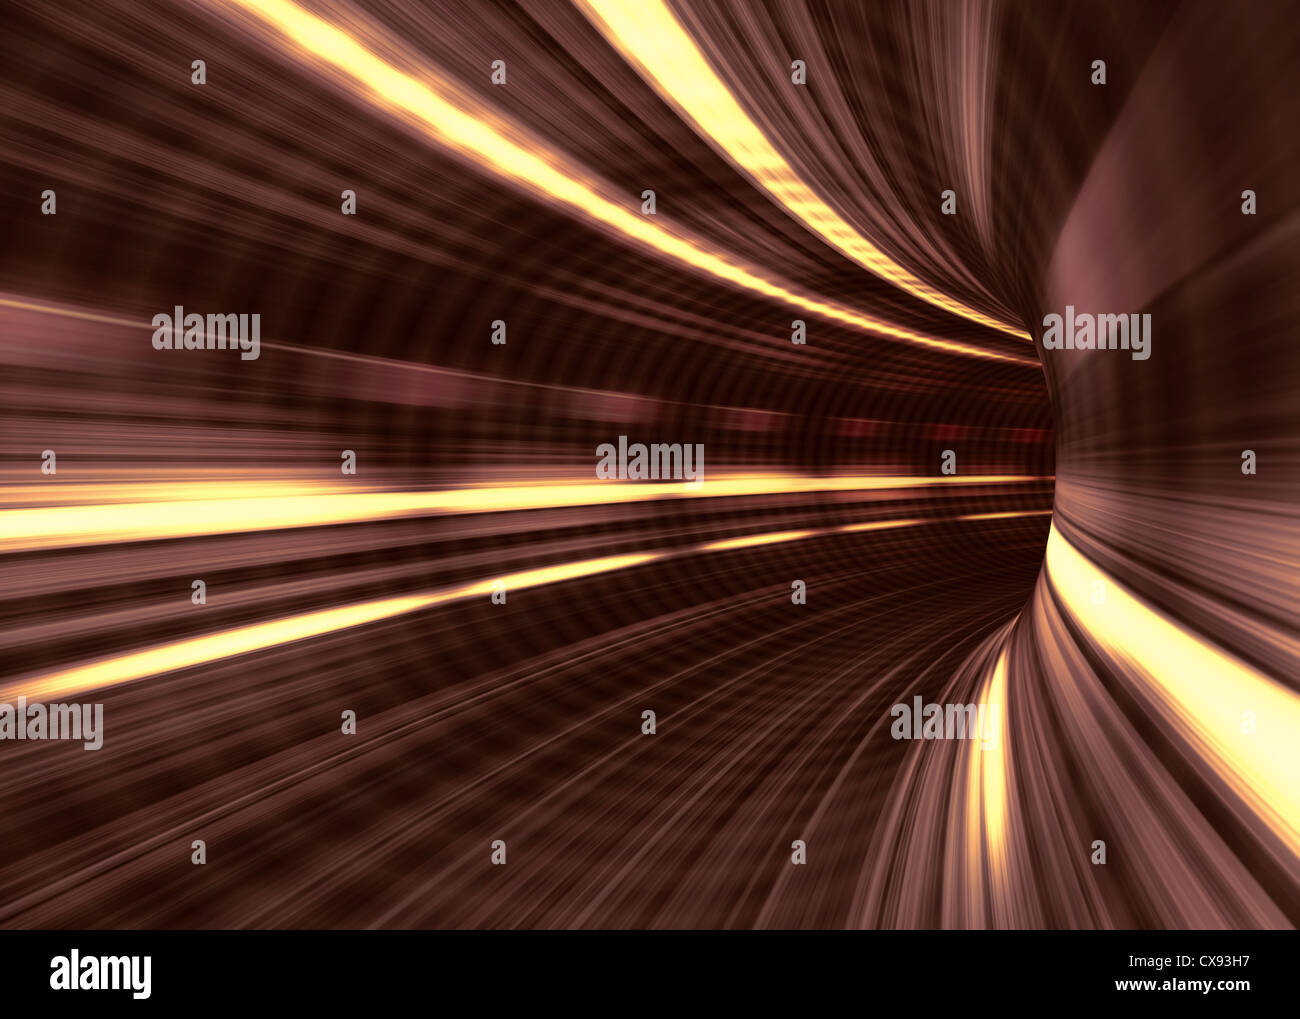 Inside a tunnel in fast movement. Stock Photo